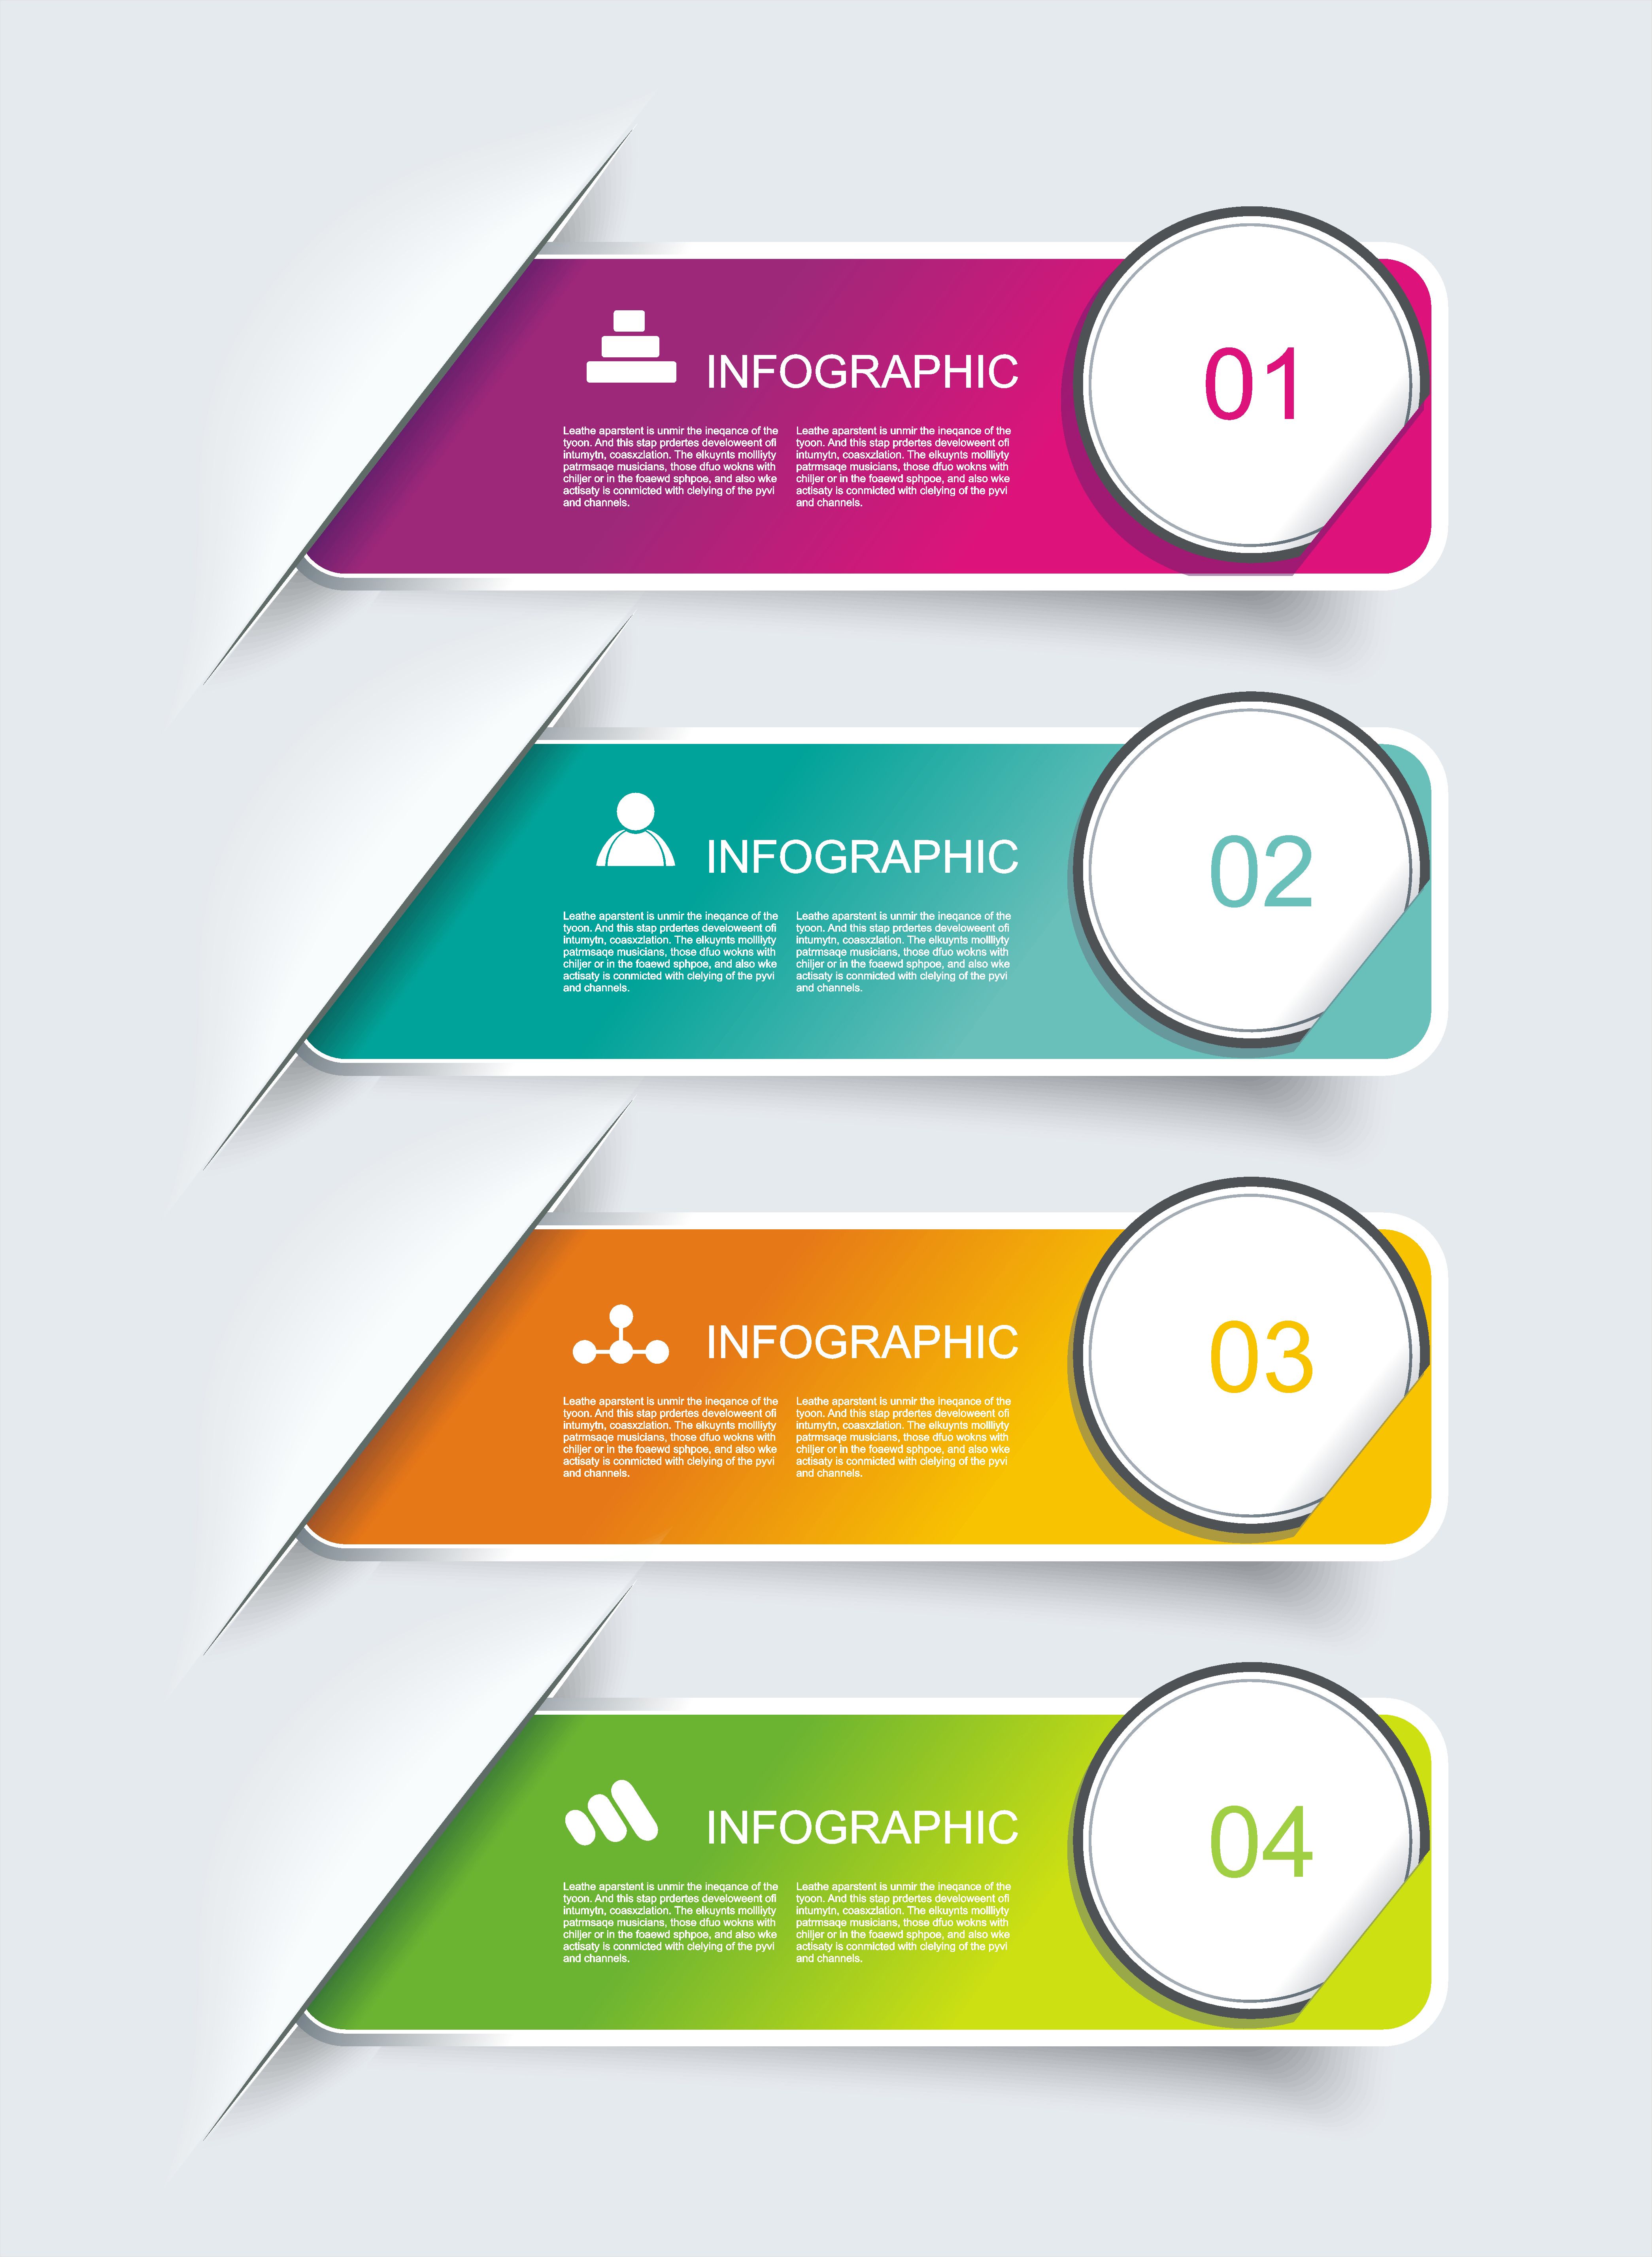 Business Design Template  Option banners. Can be used for step lines, number levels, timeline, diagram, web design.